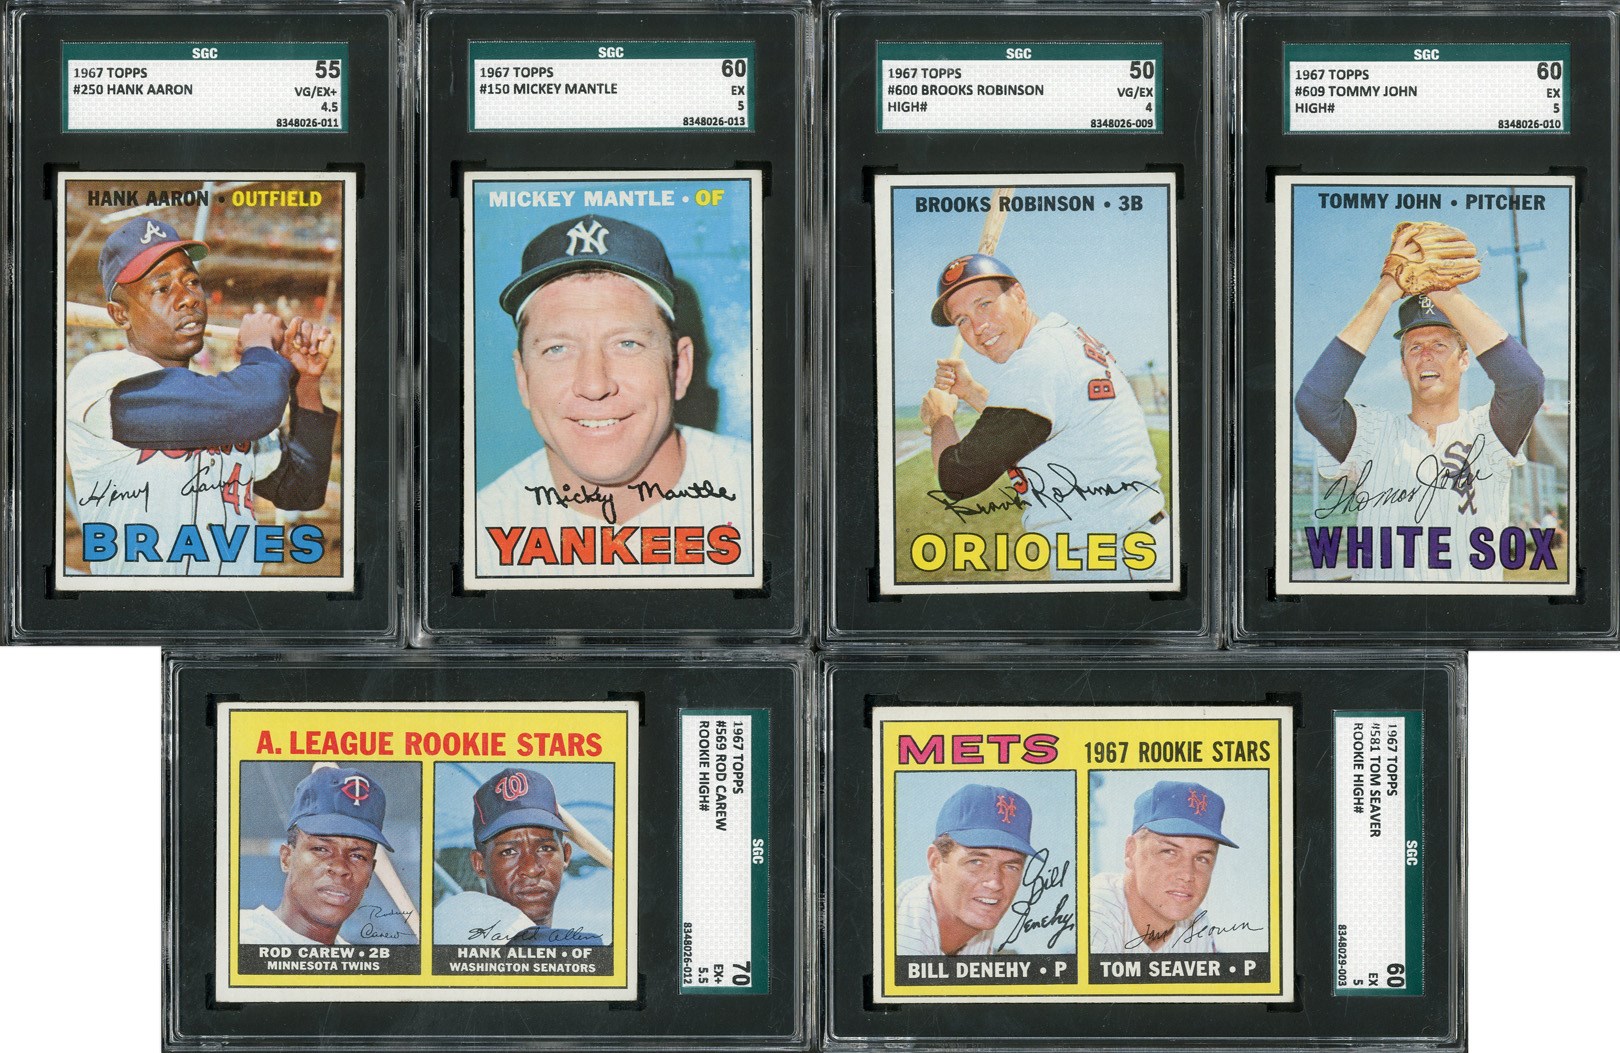 Baseball and Trading Cards - 1967 Topps Complete Set of 609 Cards (6 SGC Graded)